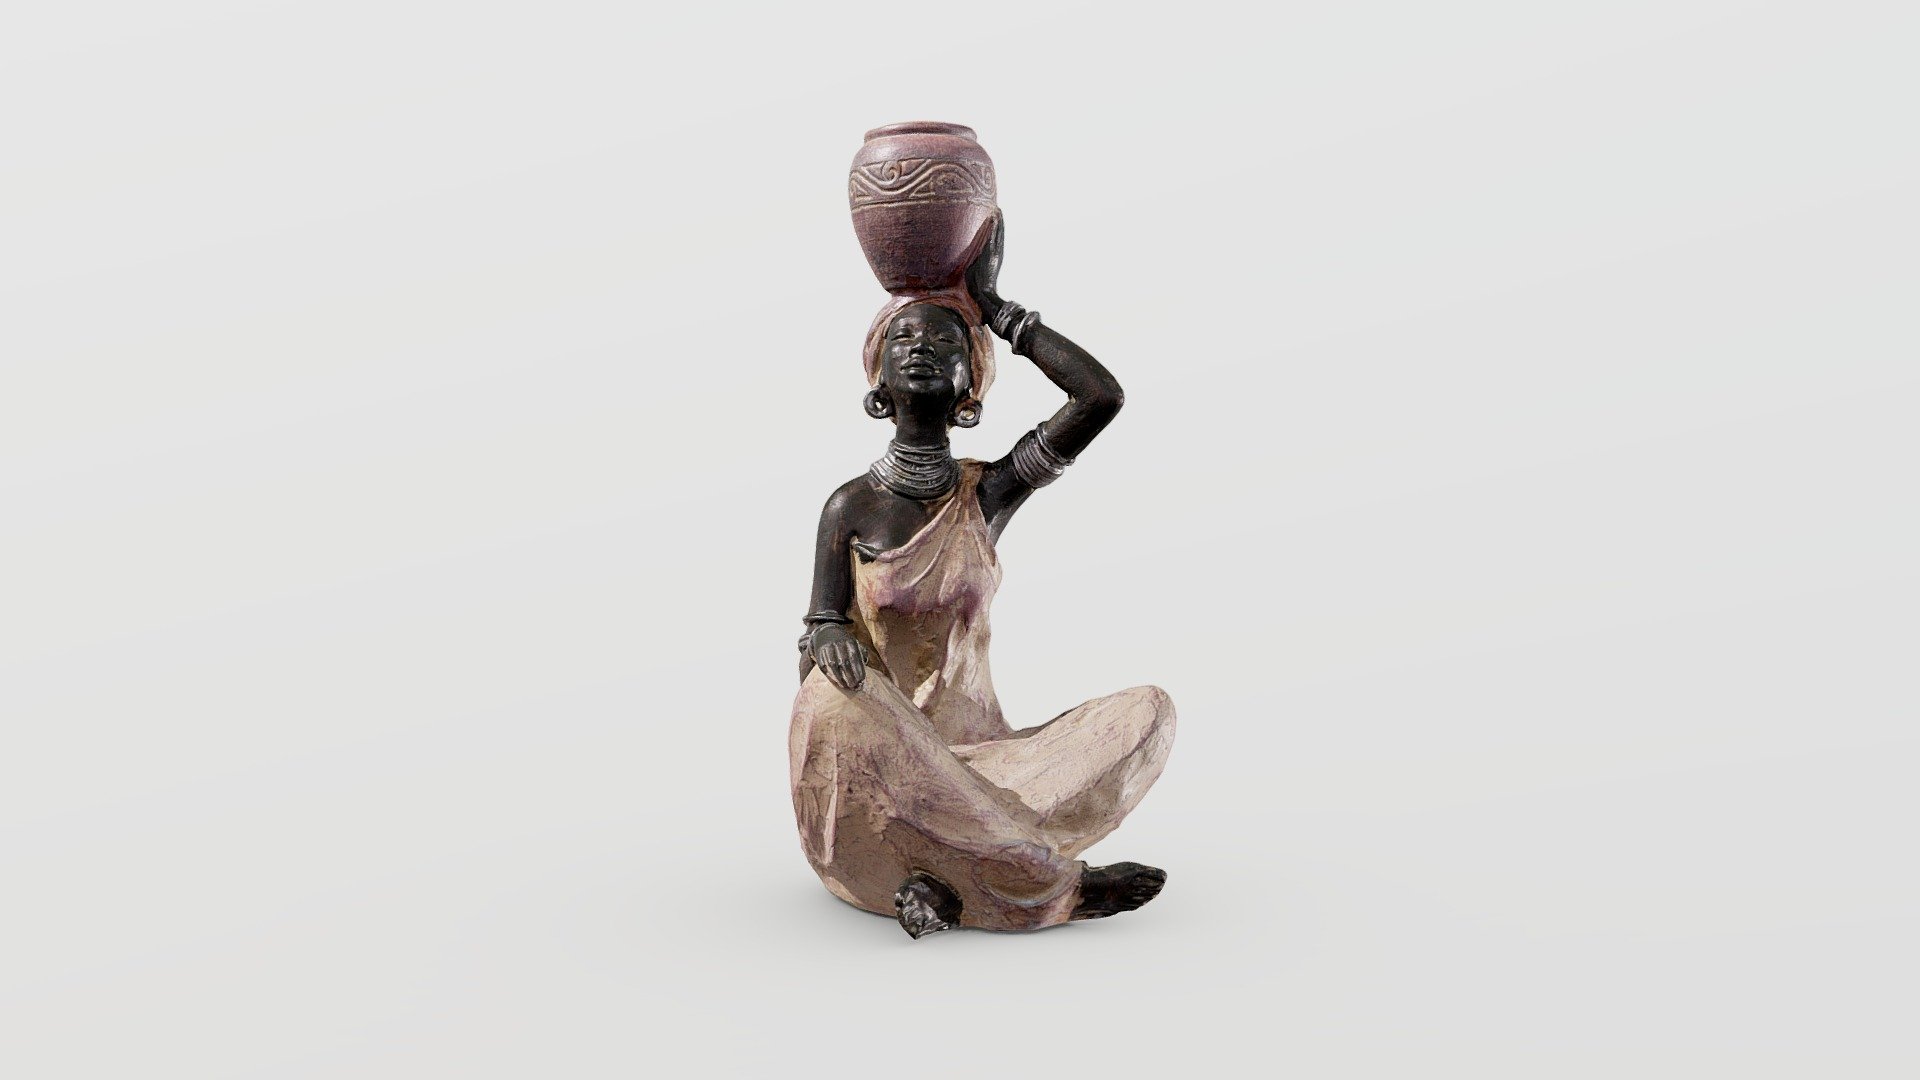 African Statue for Home Decoration

The African Figurines is crafted with professional sculpture, hand painting technique with resin material, showing a antique woodstone color appearance. The African decor statue is under handcraft, small variation may occur in details, such as size and color. Each statue is unique.

10.8 x 11.8 x 22.6 cm (78 micrometers per texel @ 4k)

Scanned using advanced technology developed by inciprocal Inc. that enables highly photo-realistic reproduction of real-world products in virtual environments. Our hardware and software technology combines advanced photometry, structured light, photogrammtery and light fields to capture and generate accurate material representations from tens of thousands of images targeting real-time and offline path-traced PBR compatible renderers.

Zip file includes low-poly OBJ mesh (in meters) with a set of 4k PBR textures compressed with lossless JPEG (no chroma sub-sampling) 3d model